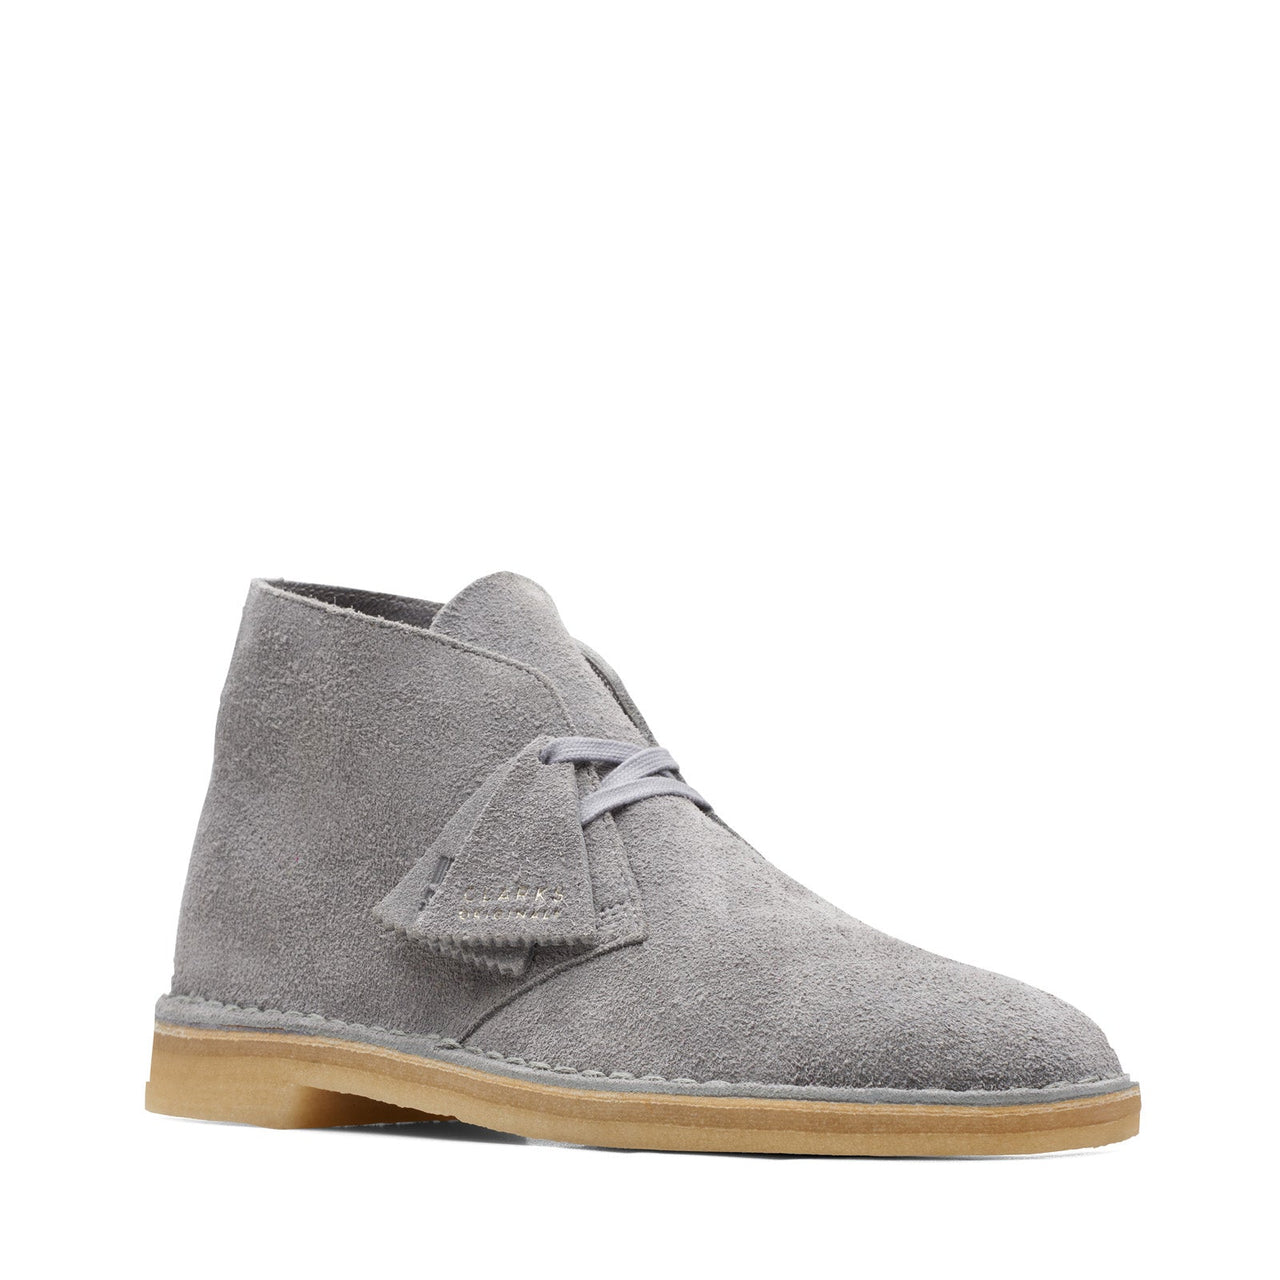 Clarks Desert Boot 26169941 Mens Gray Suede Lace Up Chukkas Boots